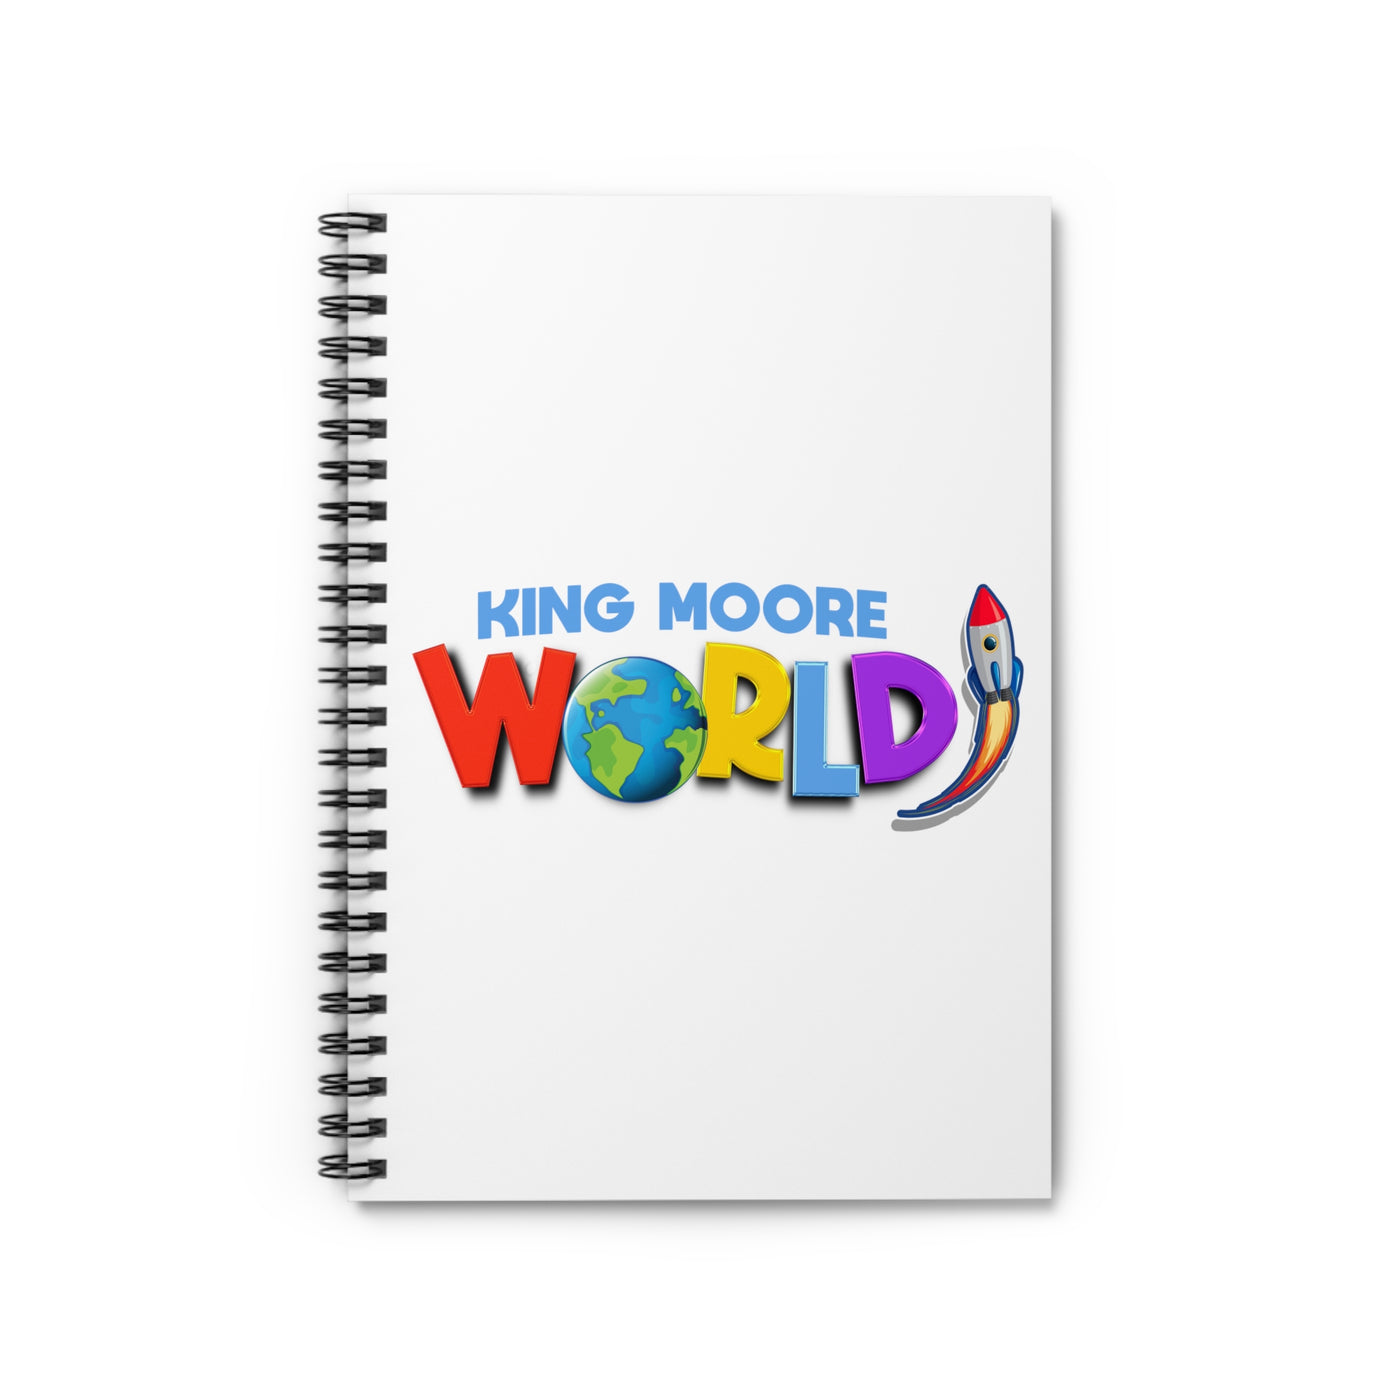 King Moore World Spiral Notebook (White)